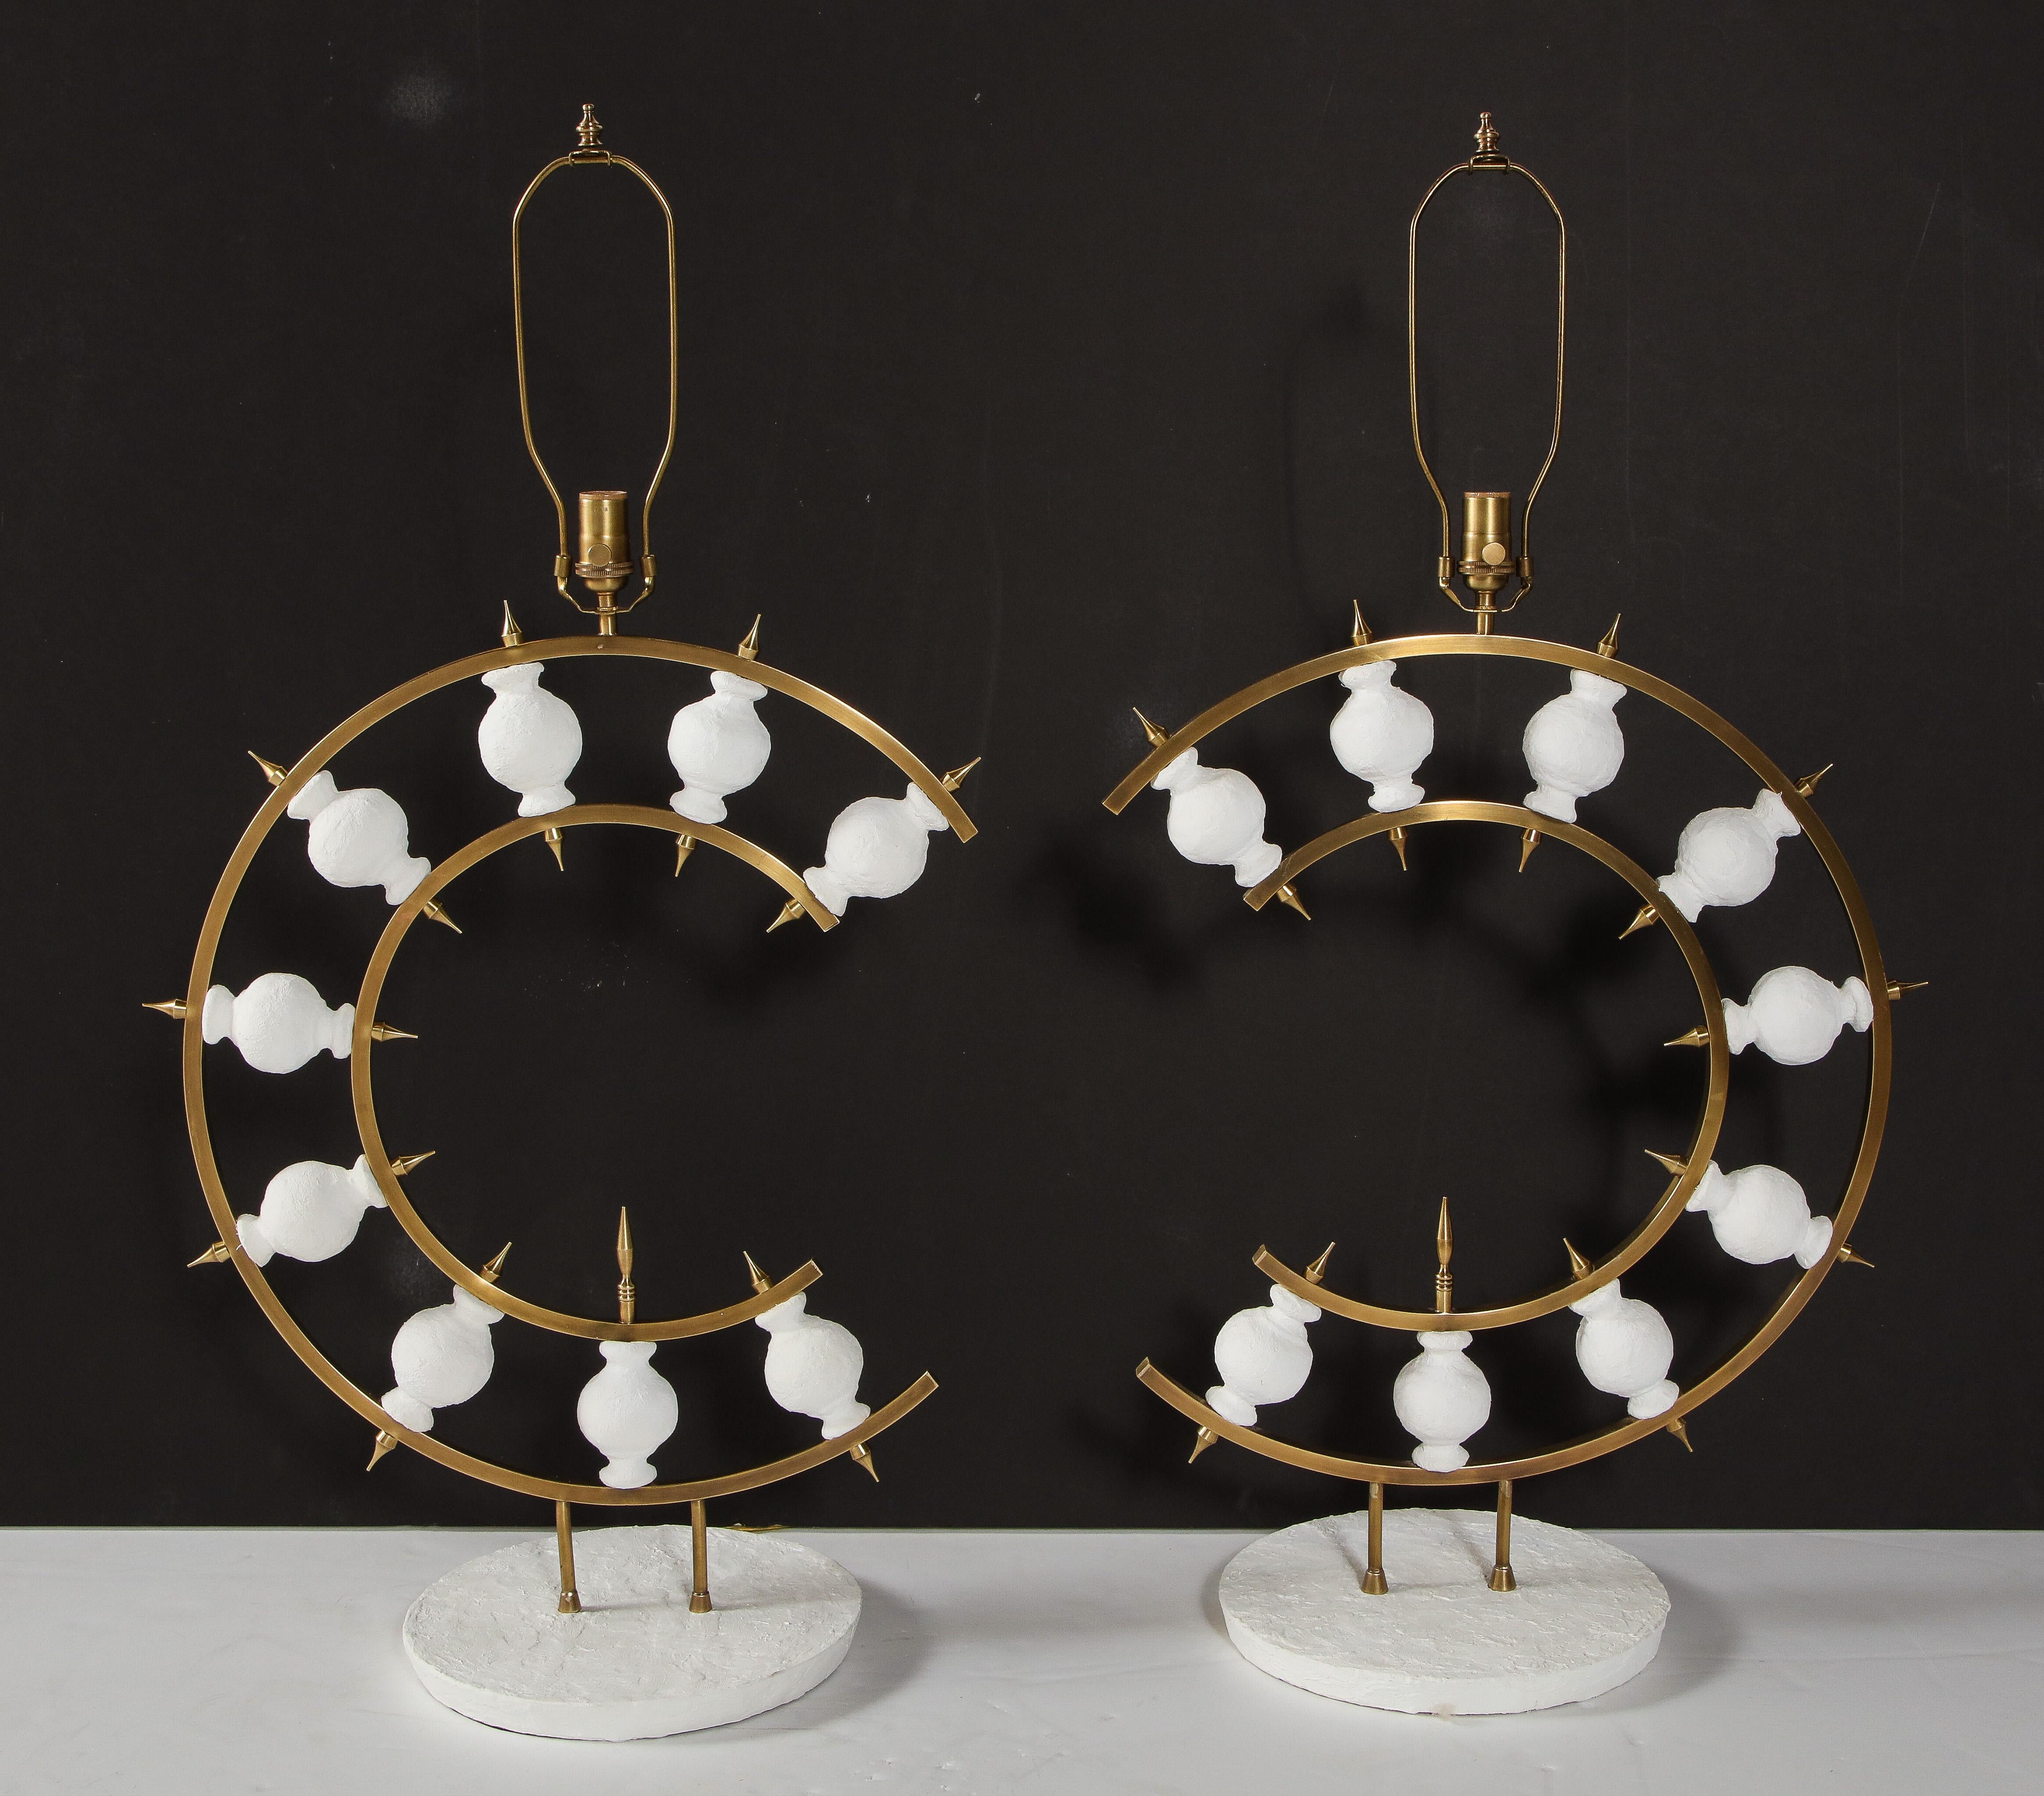 Decorative pair of plaster lamps designed by a local New York artist. The lamps are a combination of brass and white plaster. We have them in stock.